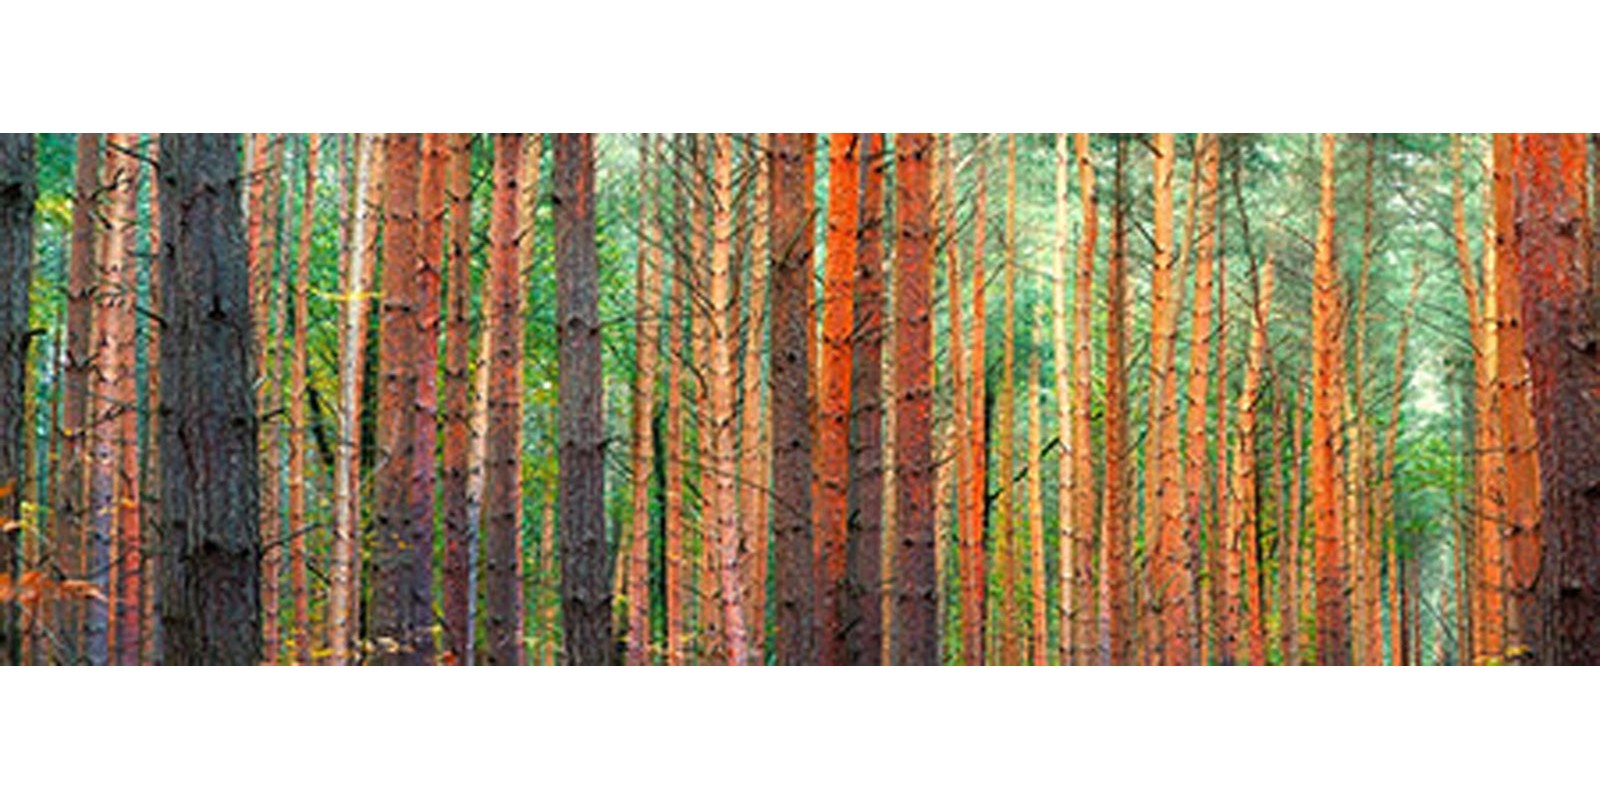 PANGEA IMAGES - Colors of the Woods